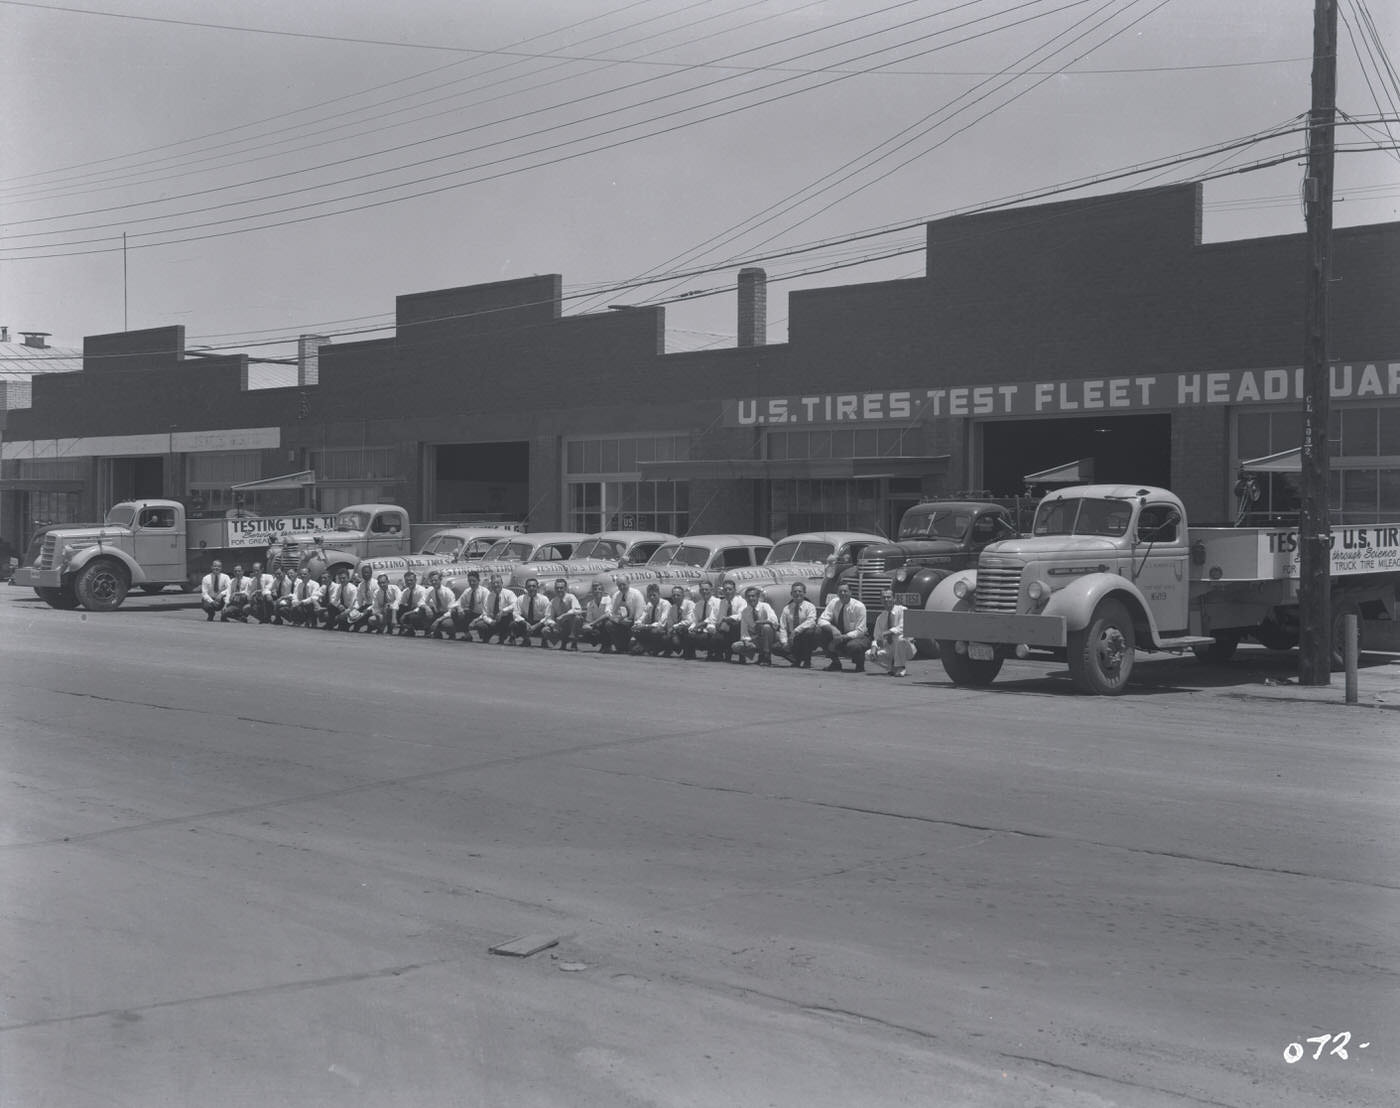 U.S. Tire and Rubber Co. Test Fleet, 1930s